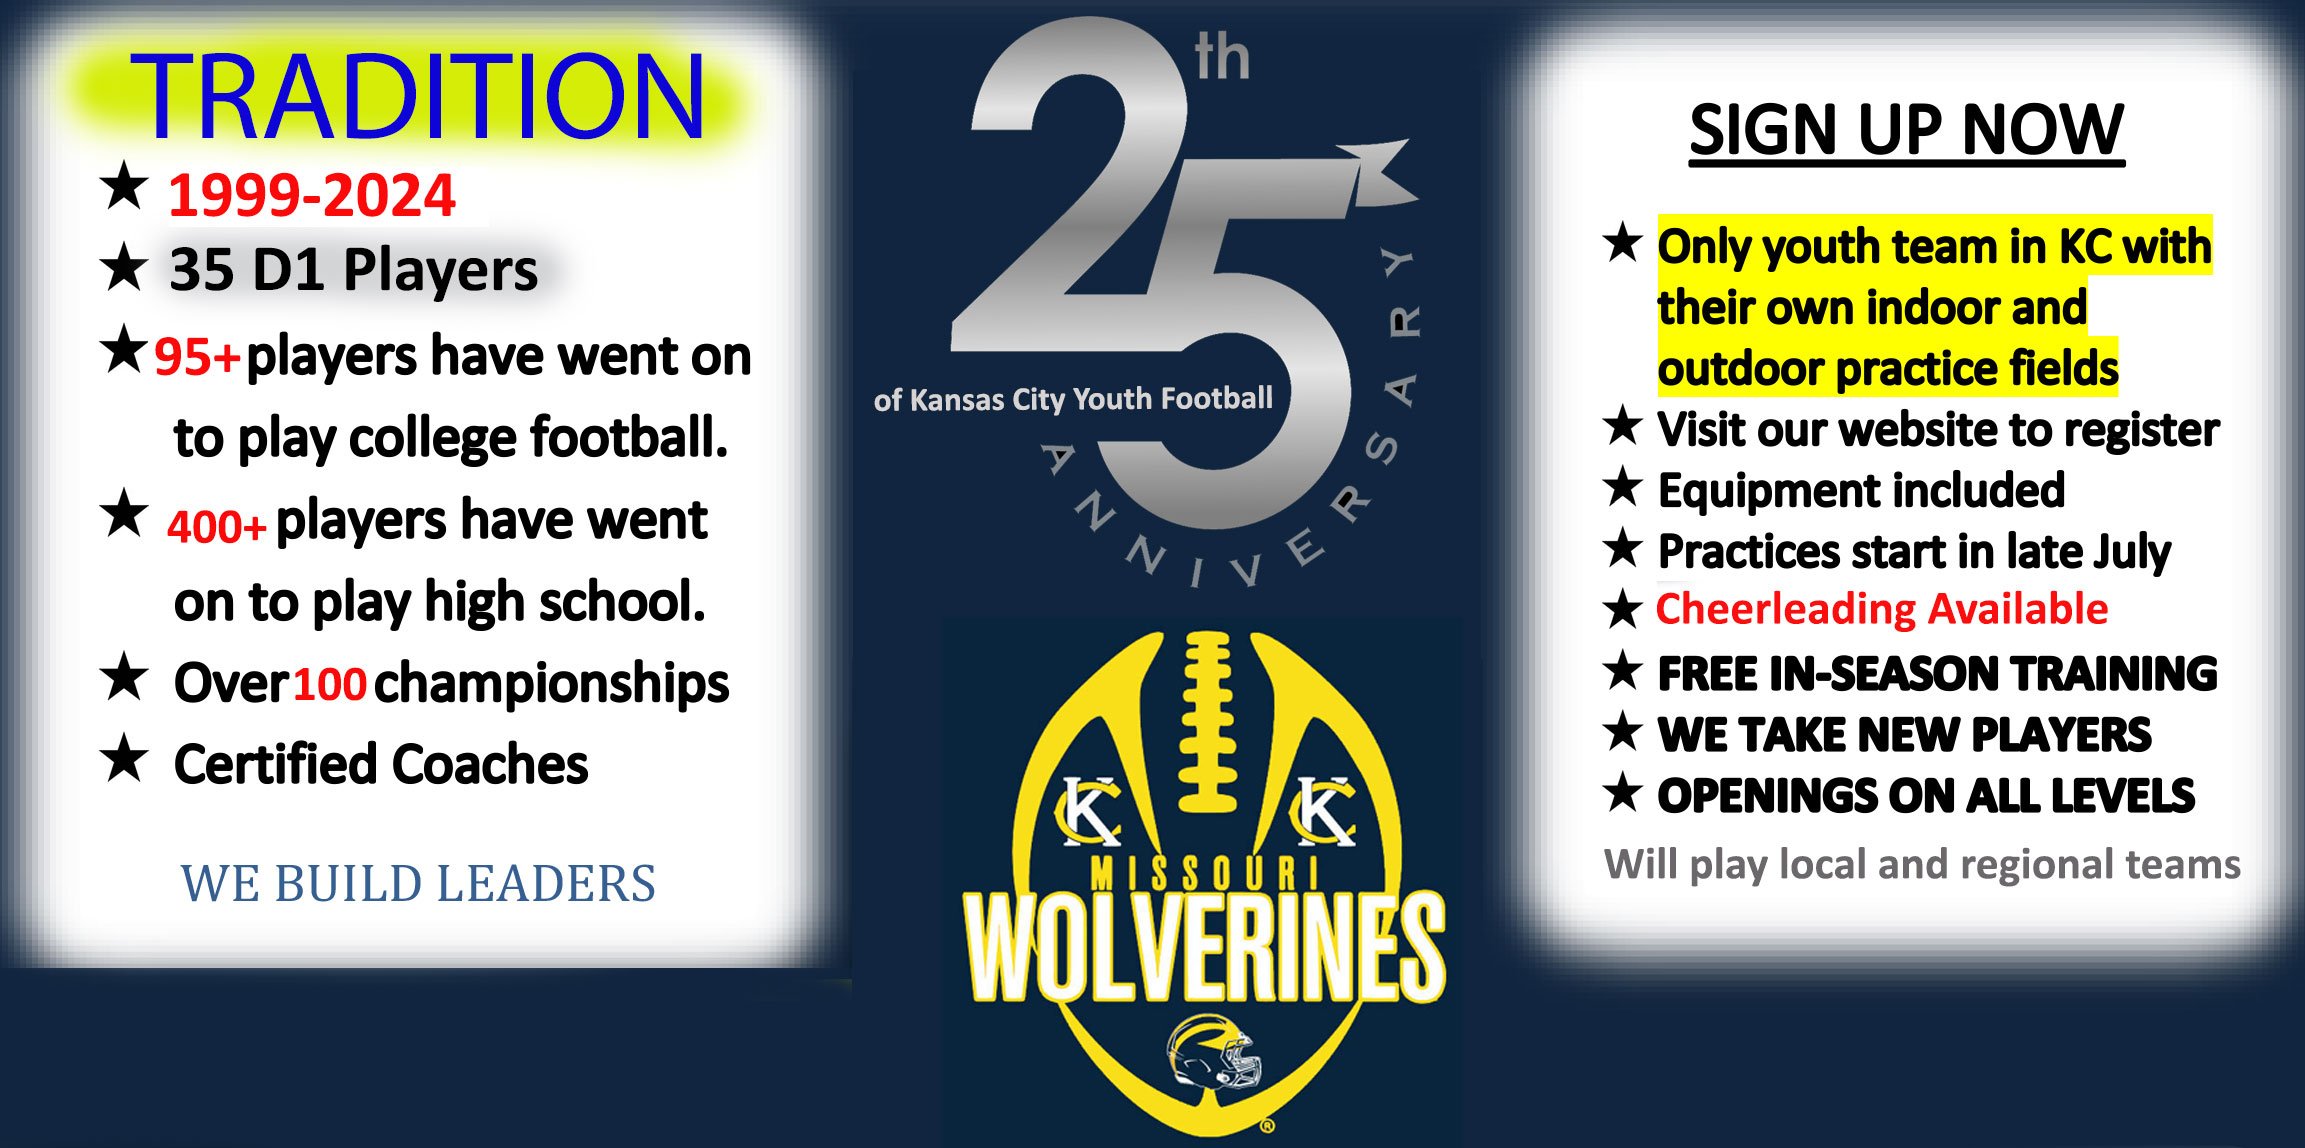 Kansas City Youth Flag and Tackle Youth Football since 1999, the Missouri Wolverines Youth Football Club has produced some of the best youth football players in the Kansas City Missouri Metro Area offering both Flag and Tackle Youth Football for Kindergarten thru 8th Grade Middle School